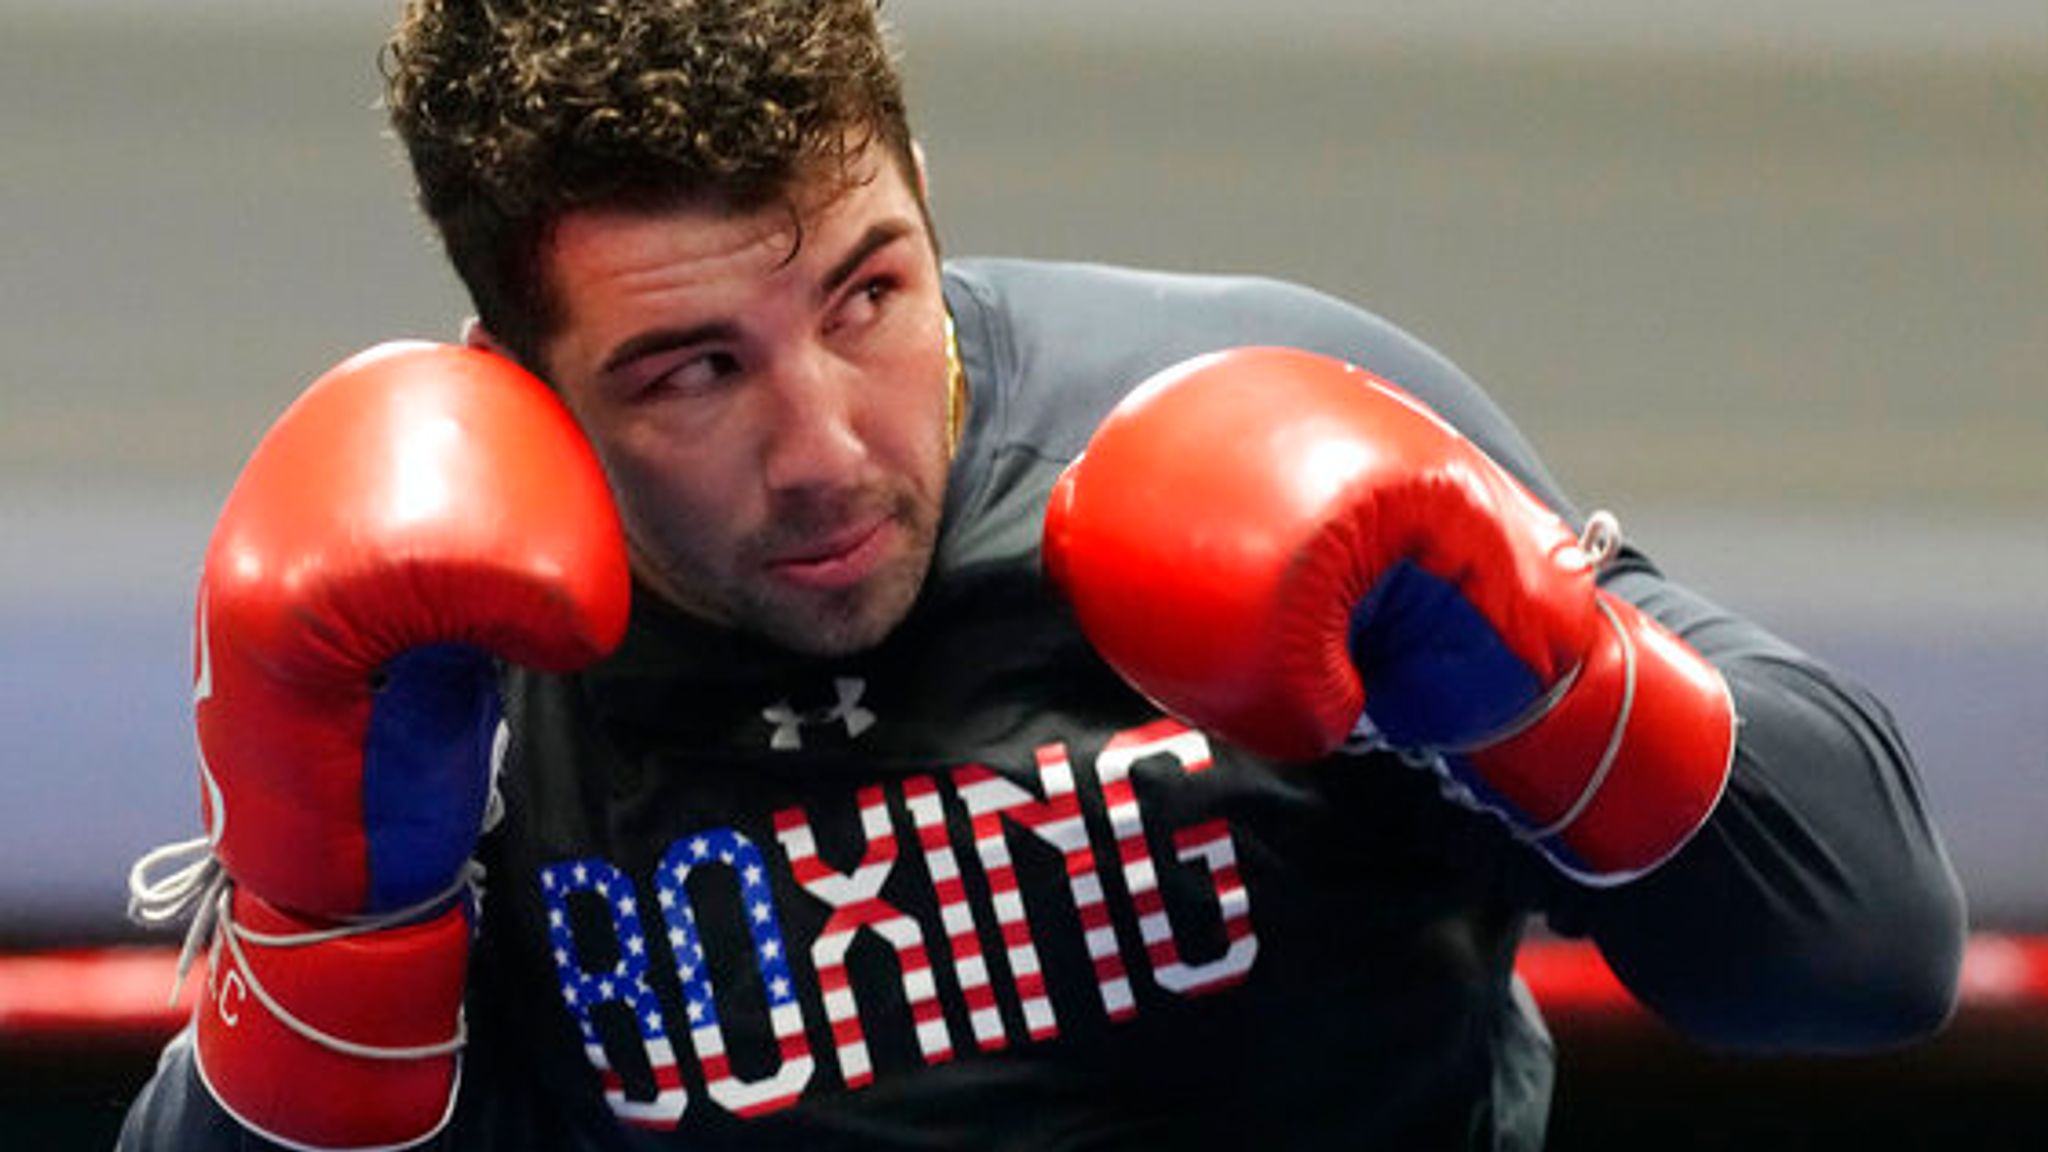 Olympics 2020 boxing results: USA's Torrez set for super heavy